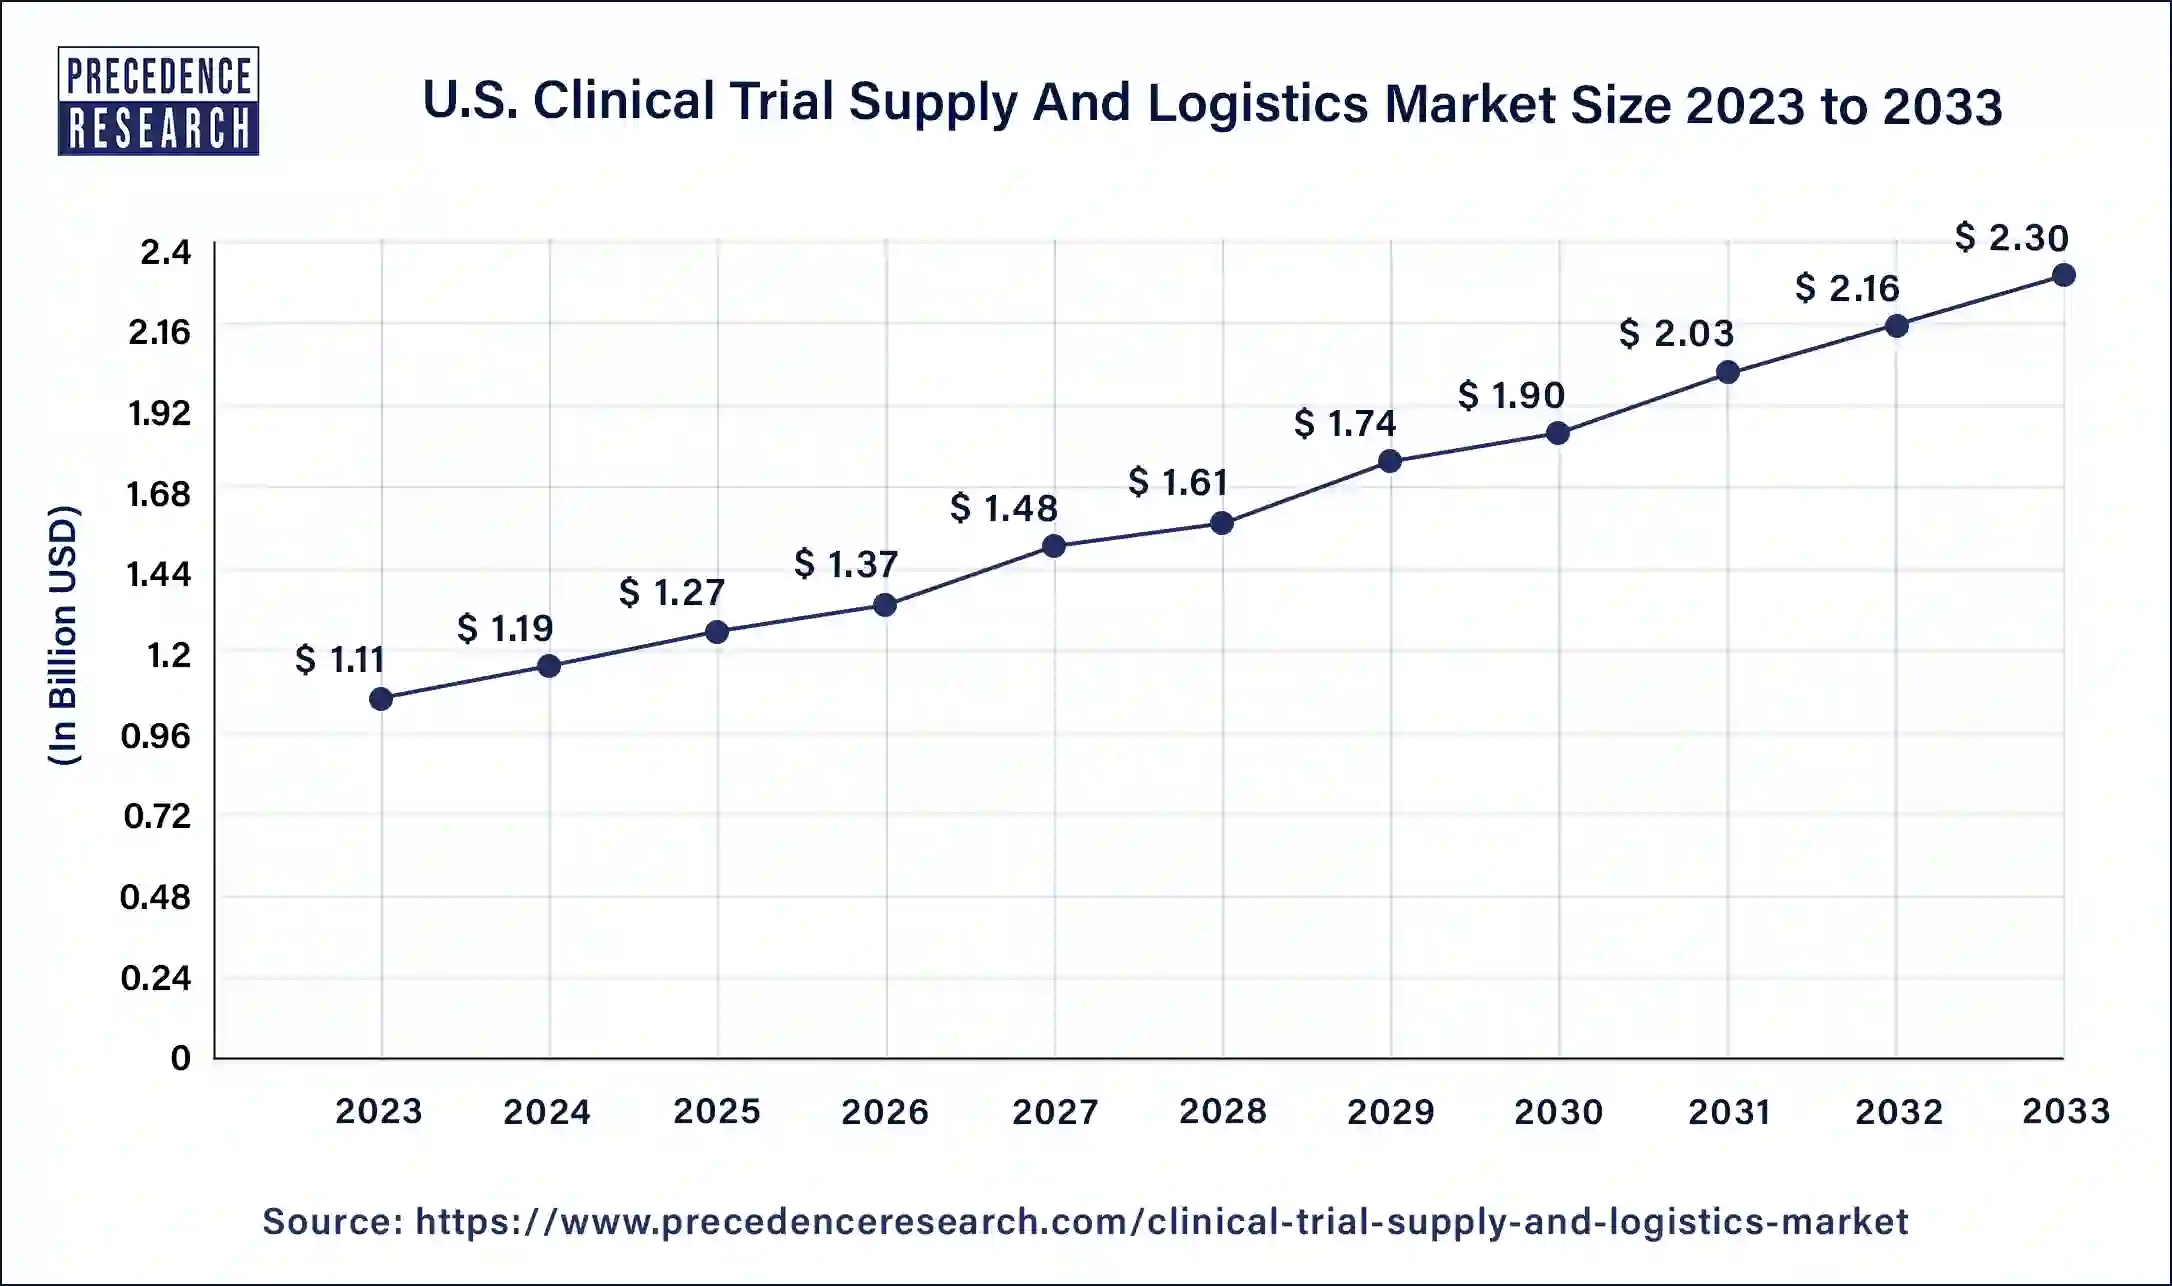 U.S. Clinical Trial Supply and Logistics Market Size 2024 To 2033